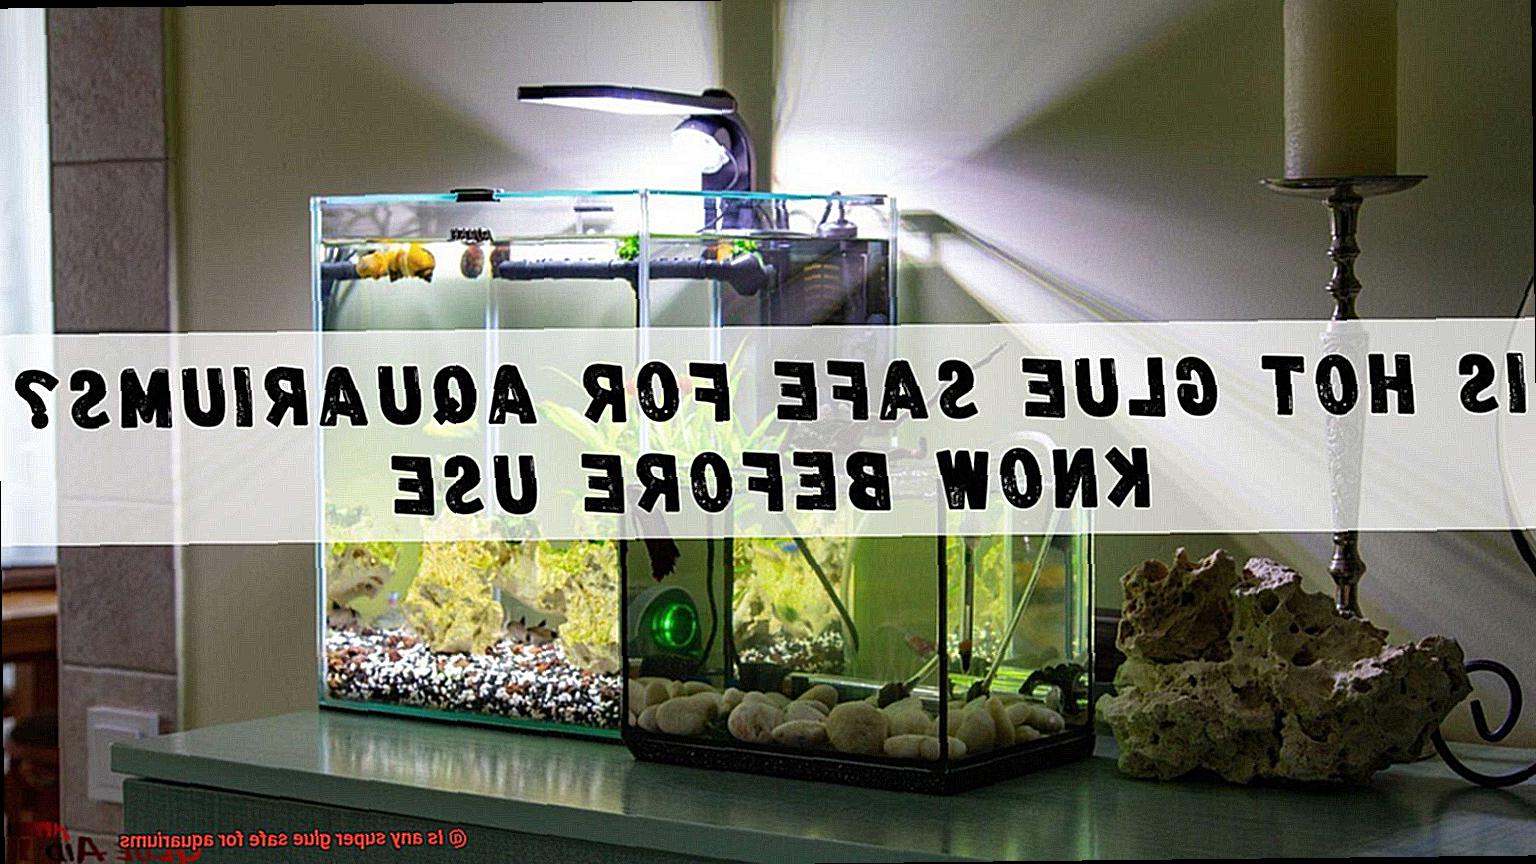 Is any super glue safe for aquariums-2